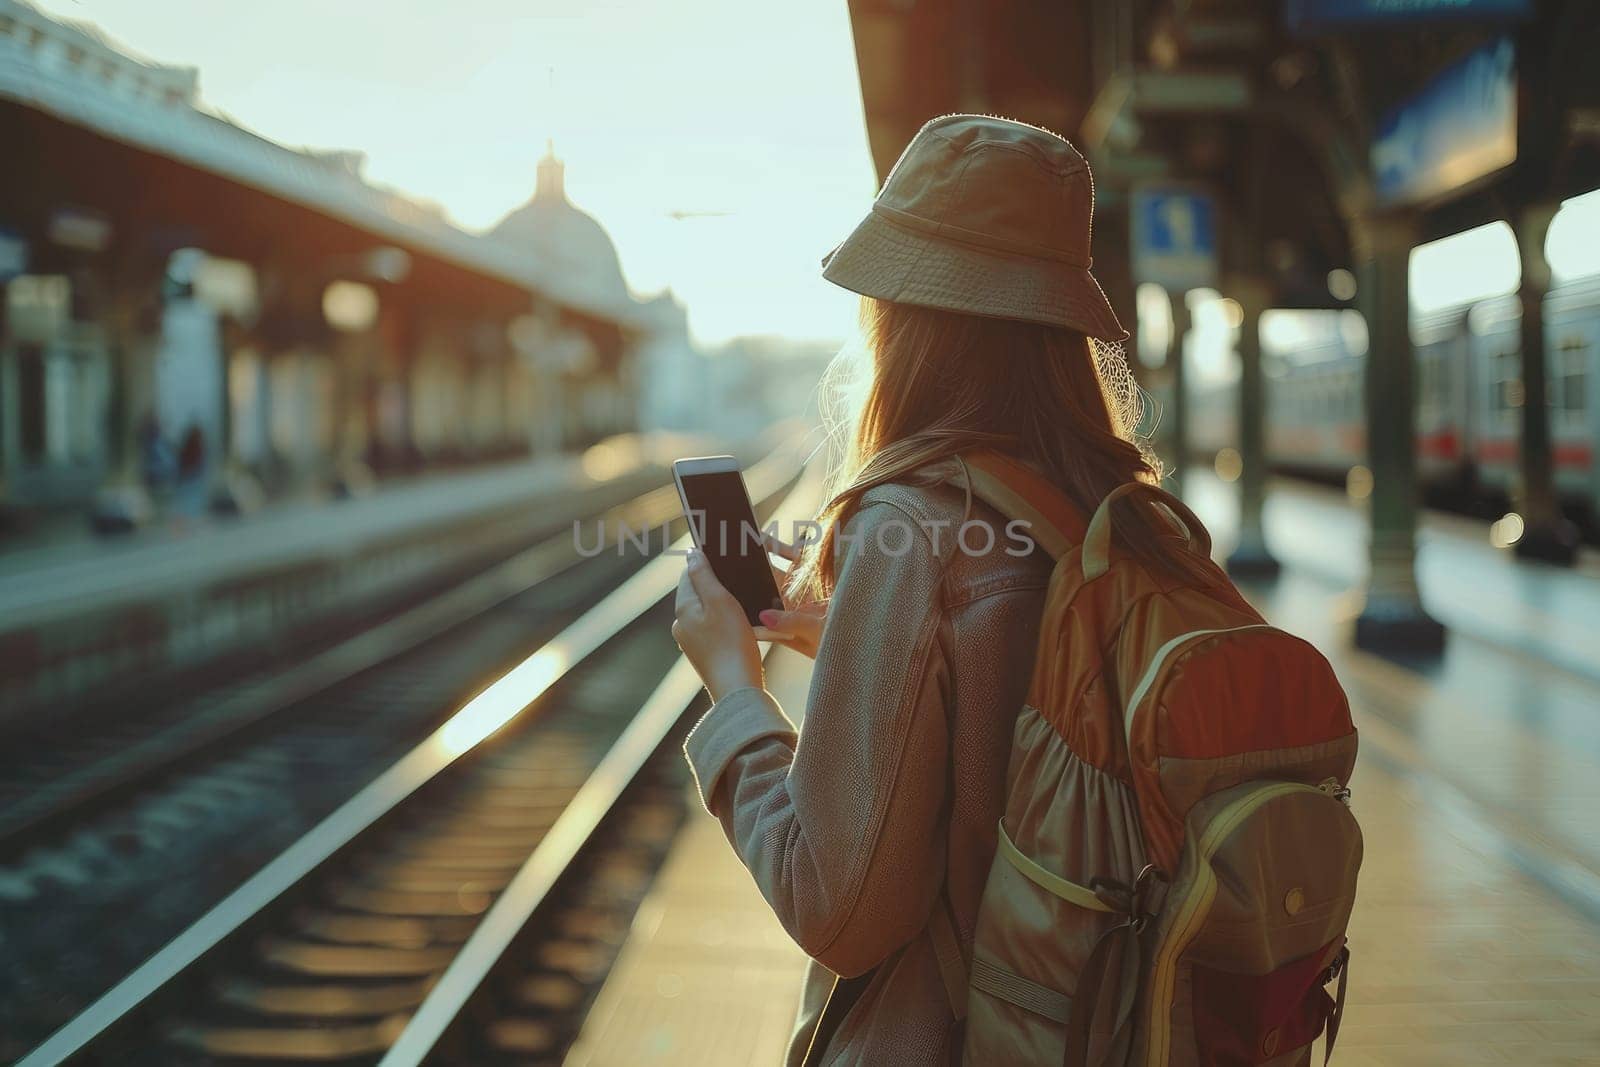 Close up of a woman's hand using mobile phone at railway station by nijieimu